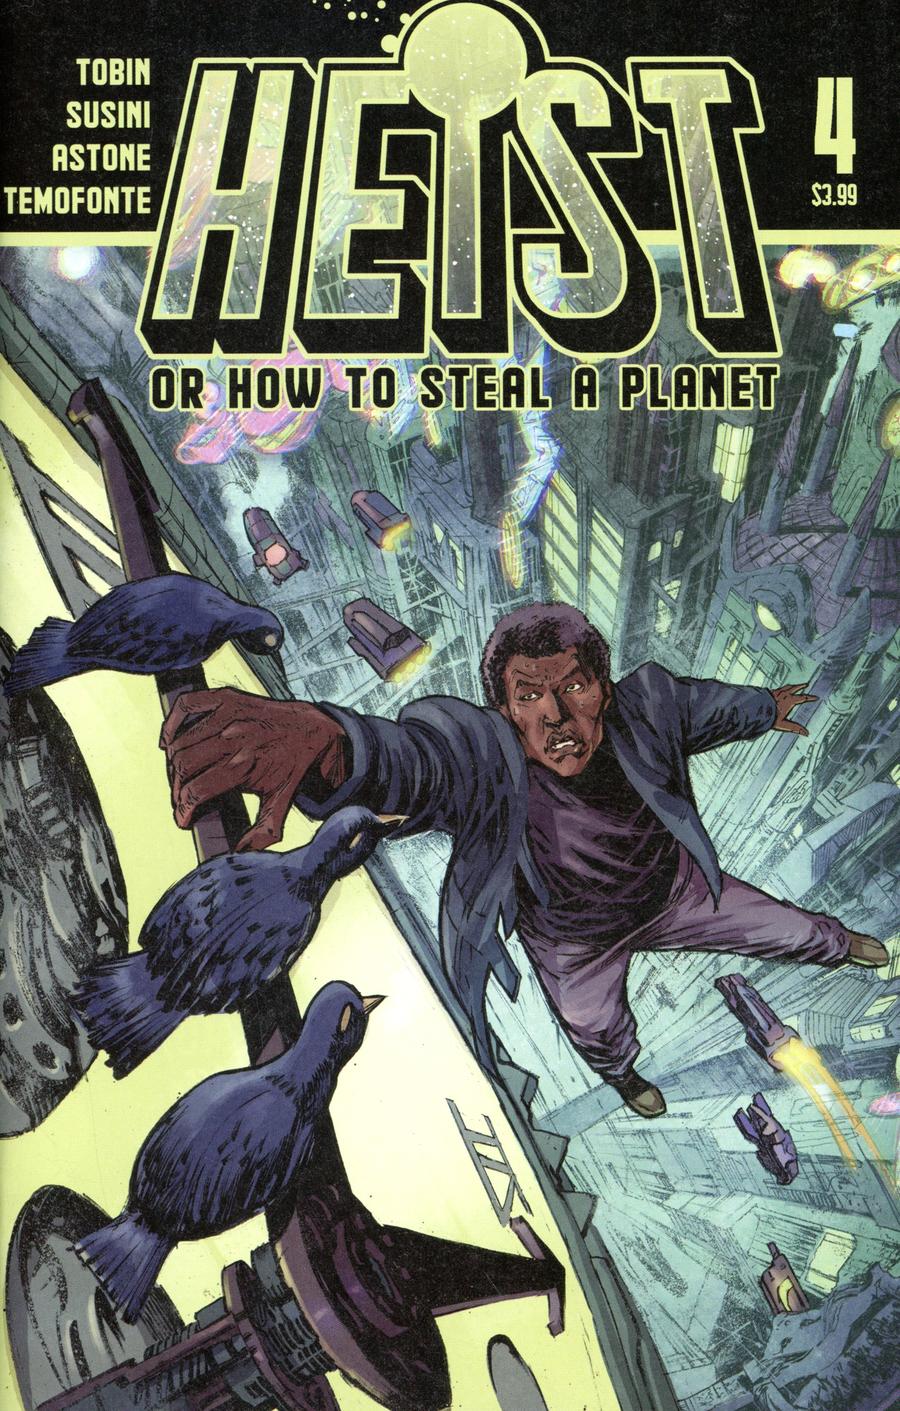 Heist Or How To Steal A Planet #4